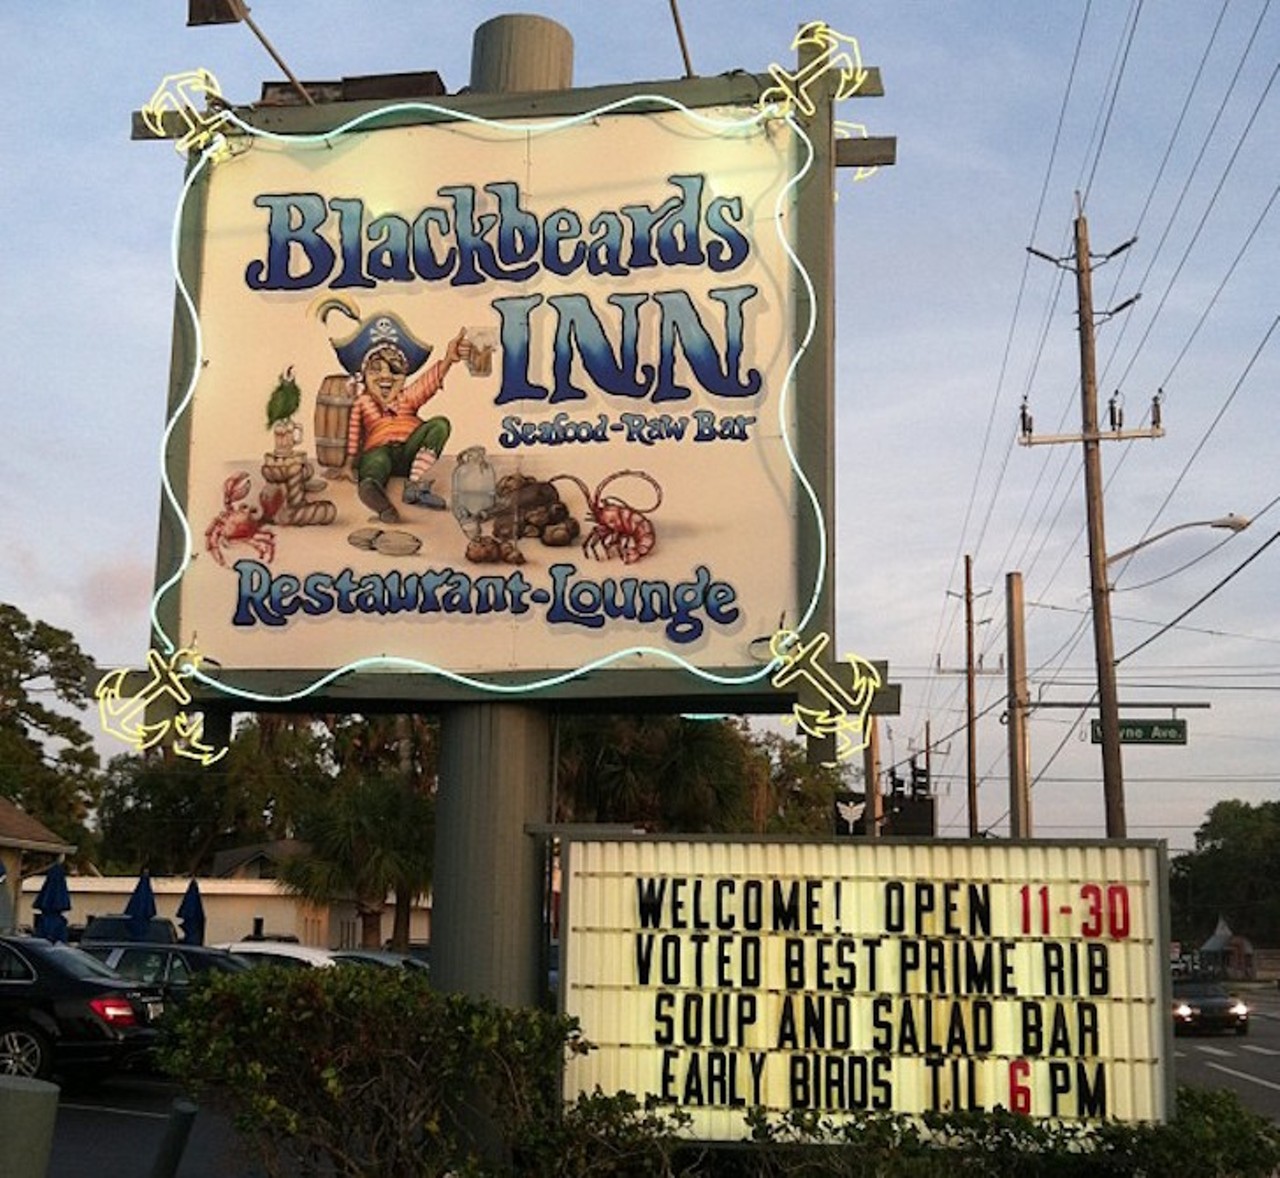 Blackbeards Inn
701 N Dixie Fwy, New Smyrna Beach, FL 32168
(386) 427-0414
Seafood, steaks and prime rib&#151;get all 3 and more at Blackbeards Inn. The restaurant offers early bird options with specials like fried or broiled fish of the day. If you&#146;re up to the challenge, indulge in the famous Blackbeard&#146;s Fried Platter, or build your own platter. If you love cheese, there&#146;s a section on the menu just for you, consisting of seafood stuffed with a variety of cheeses
Photo via danpaintman/Instagram